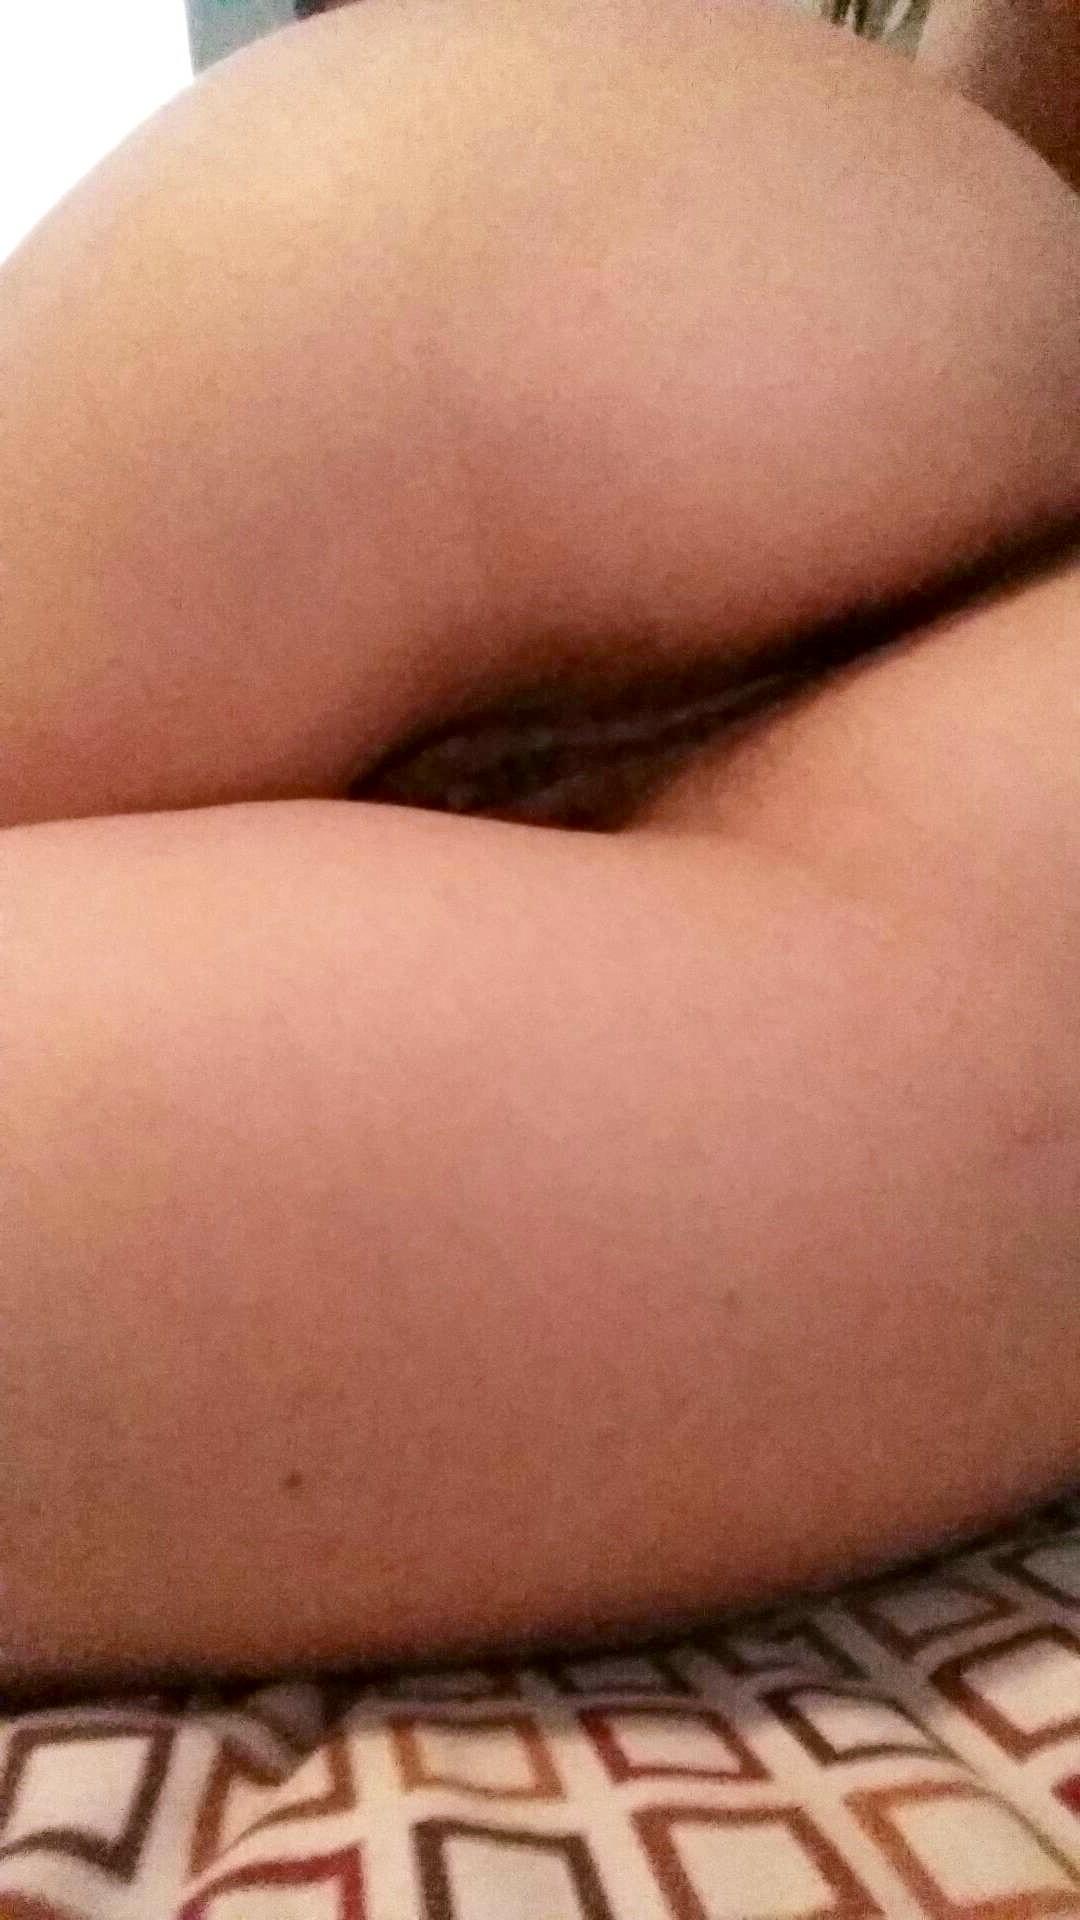 Leaked Teen’s Snapchat Nudes